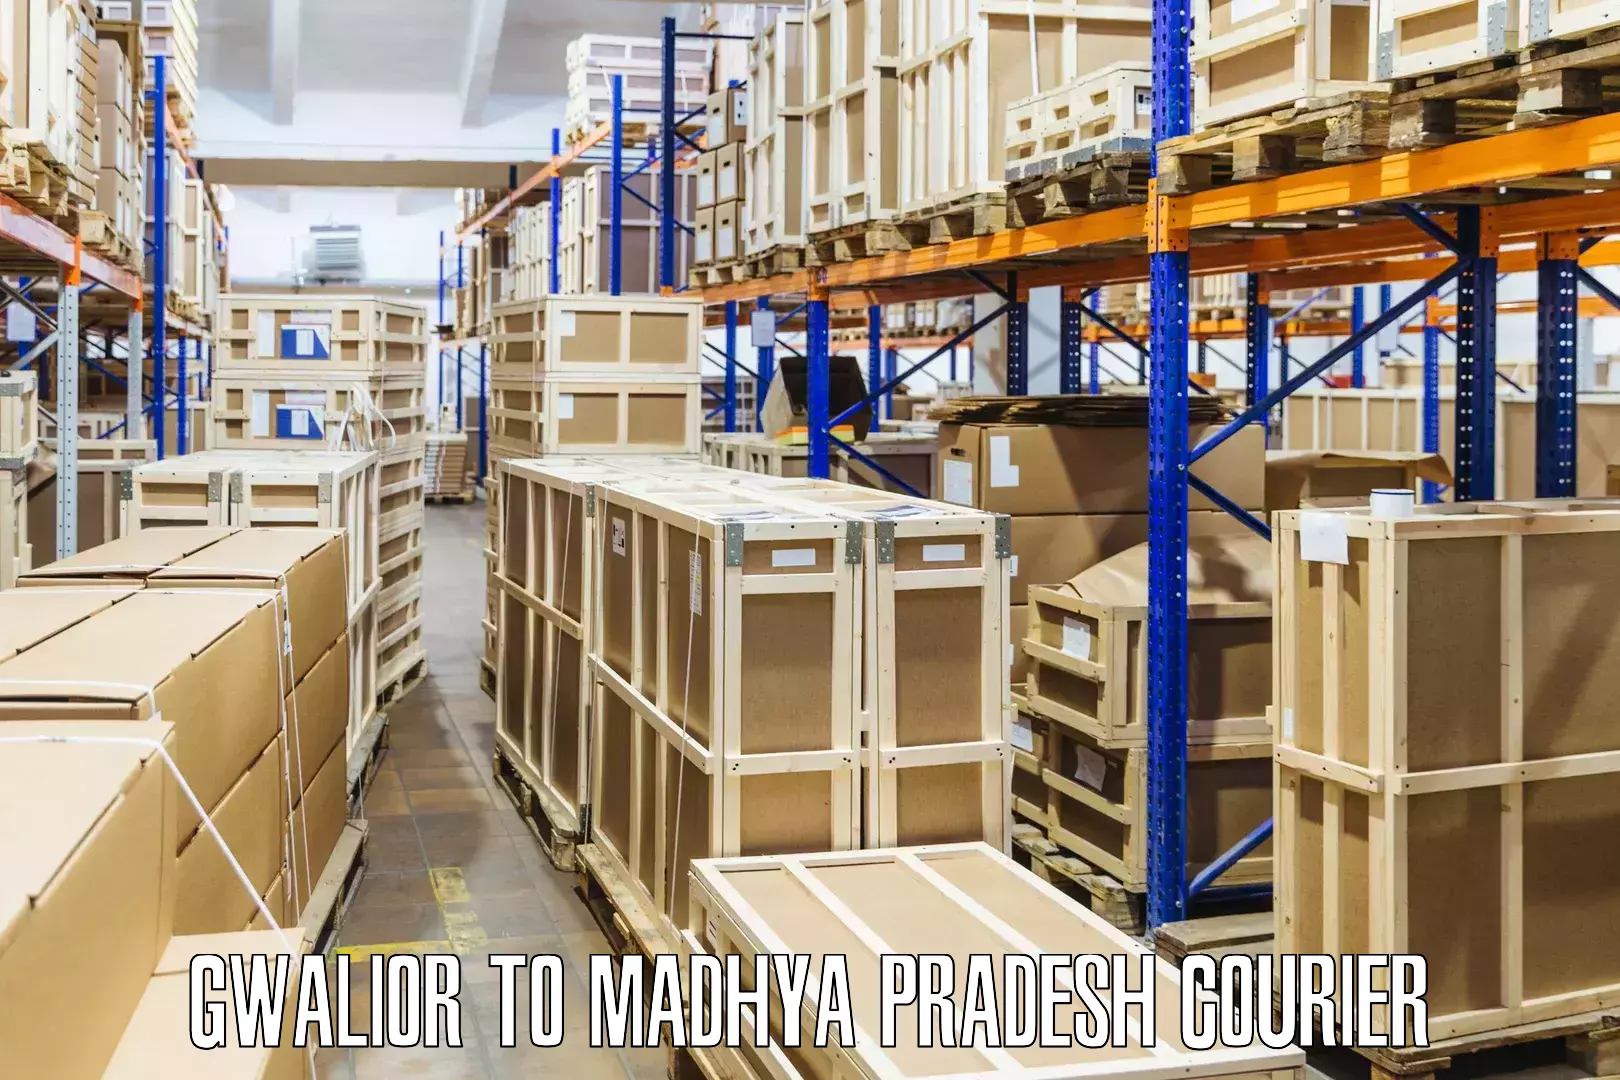 Express package delivery Gwalior to Madhya Pradesh